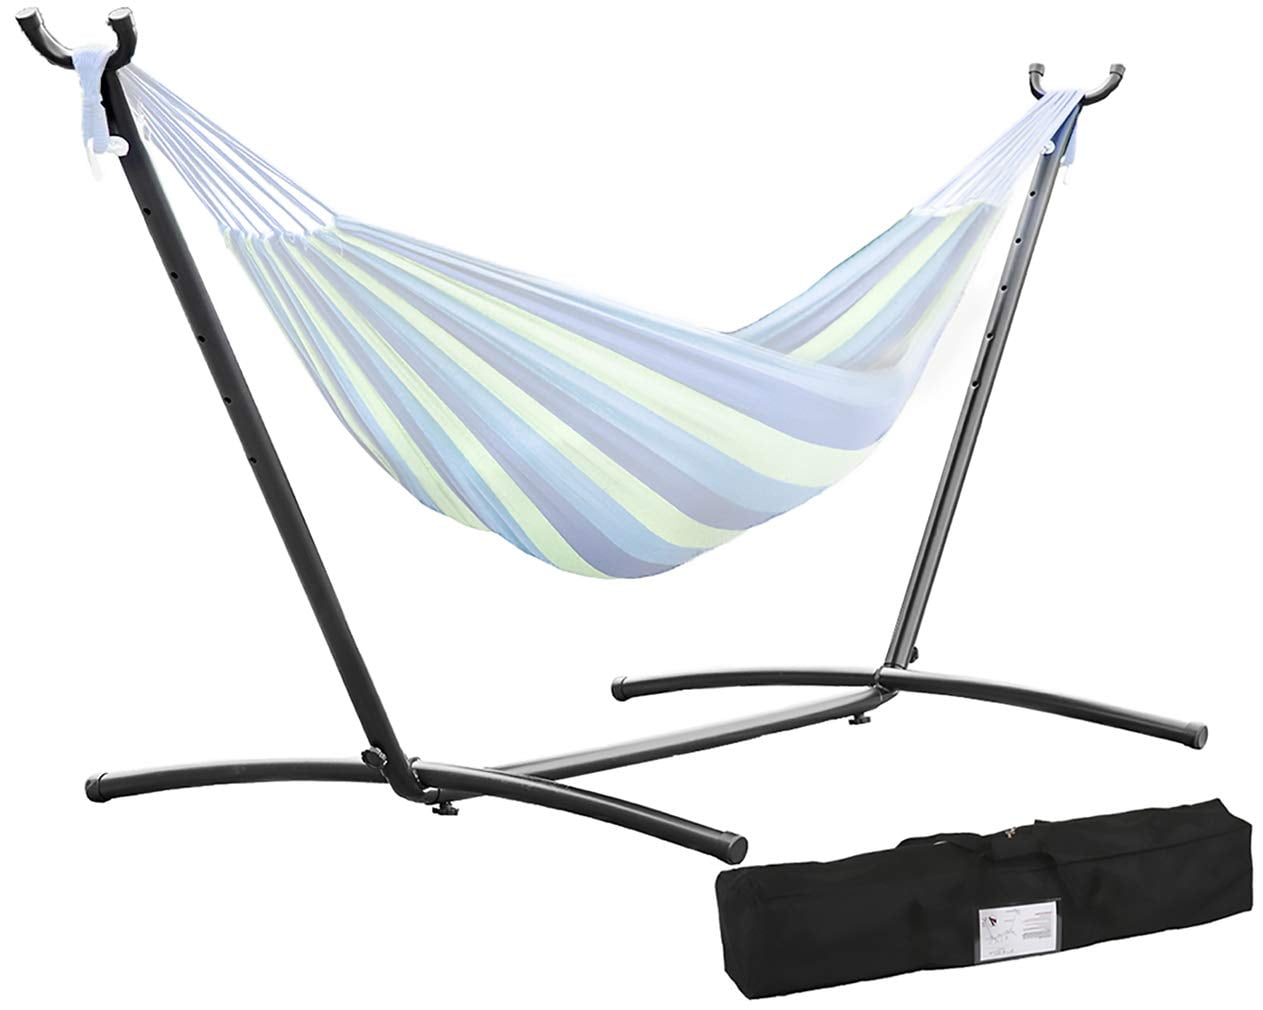 Details about   Hammock Stand With Space Saving Steel Stand Includes Carrying Case US STOCK NV 